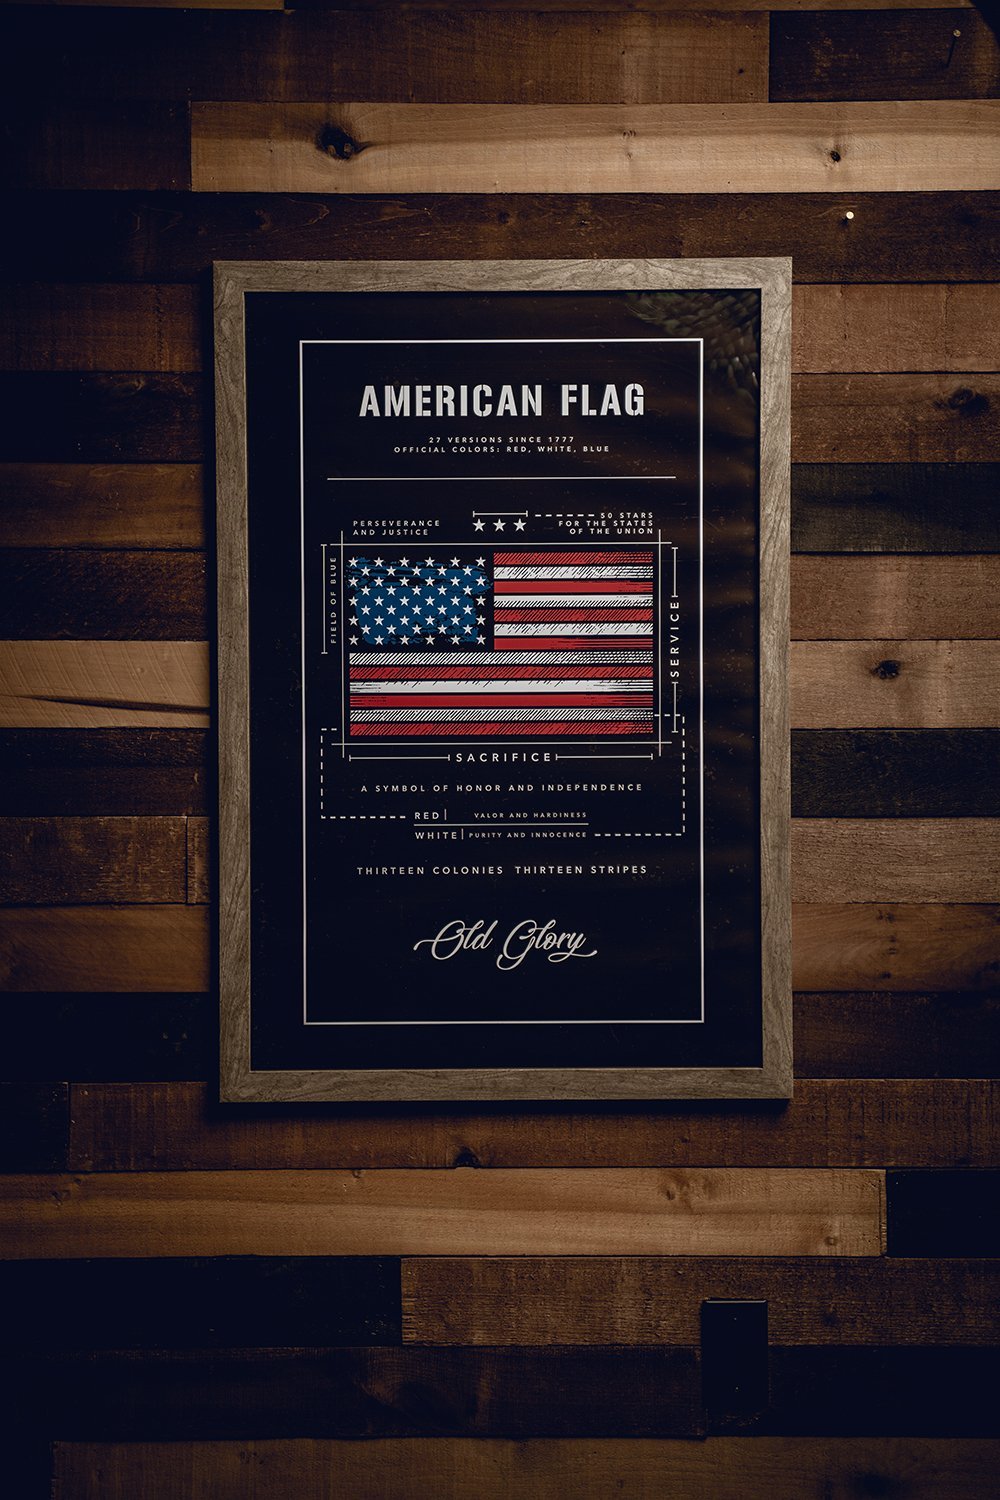 American Flag Schematic Poster [ON SALE] - Nine Line Apparel